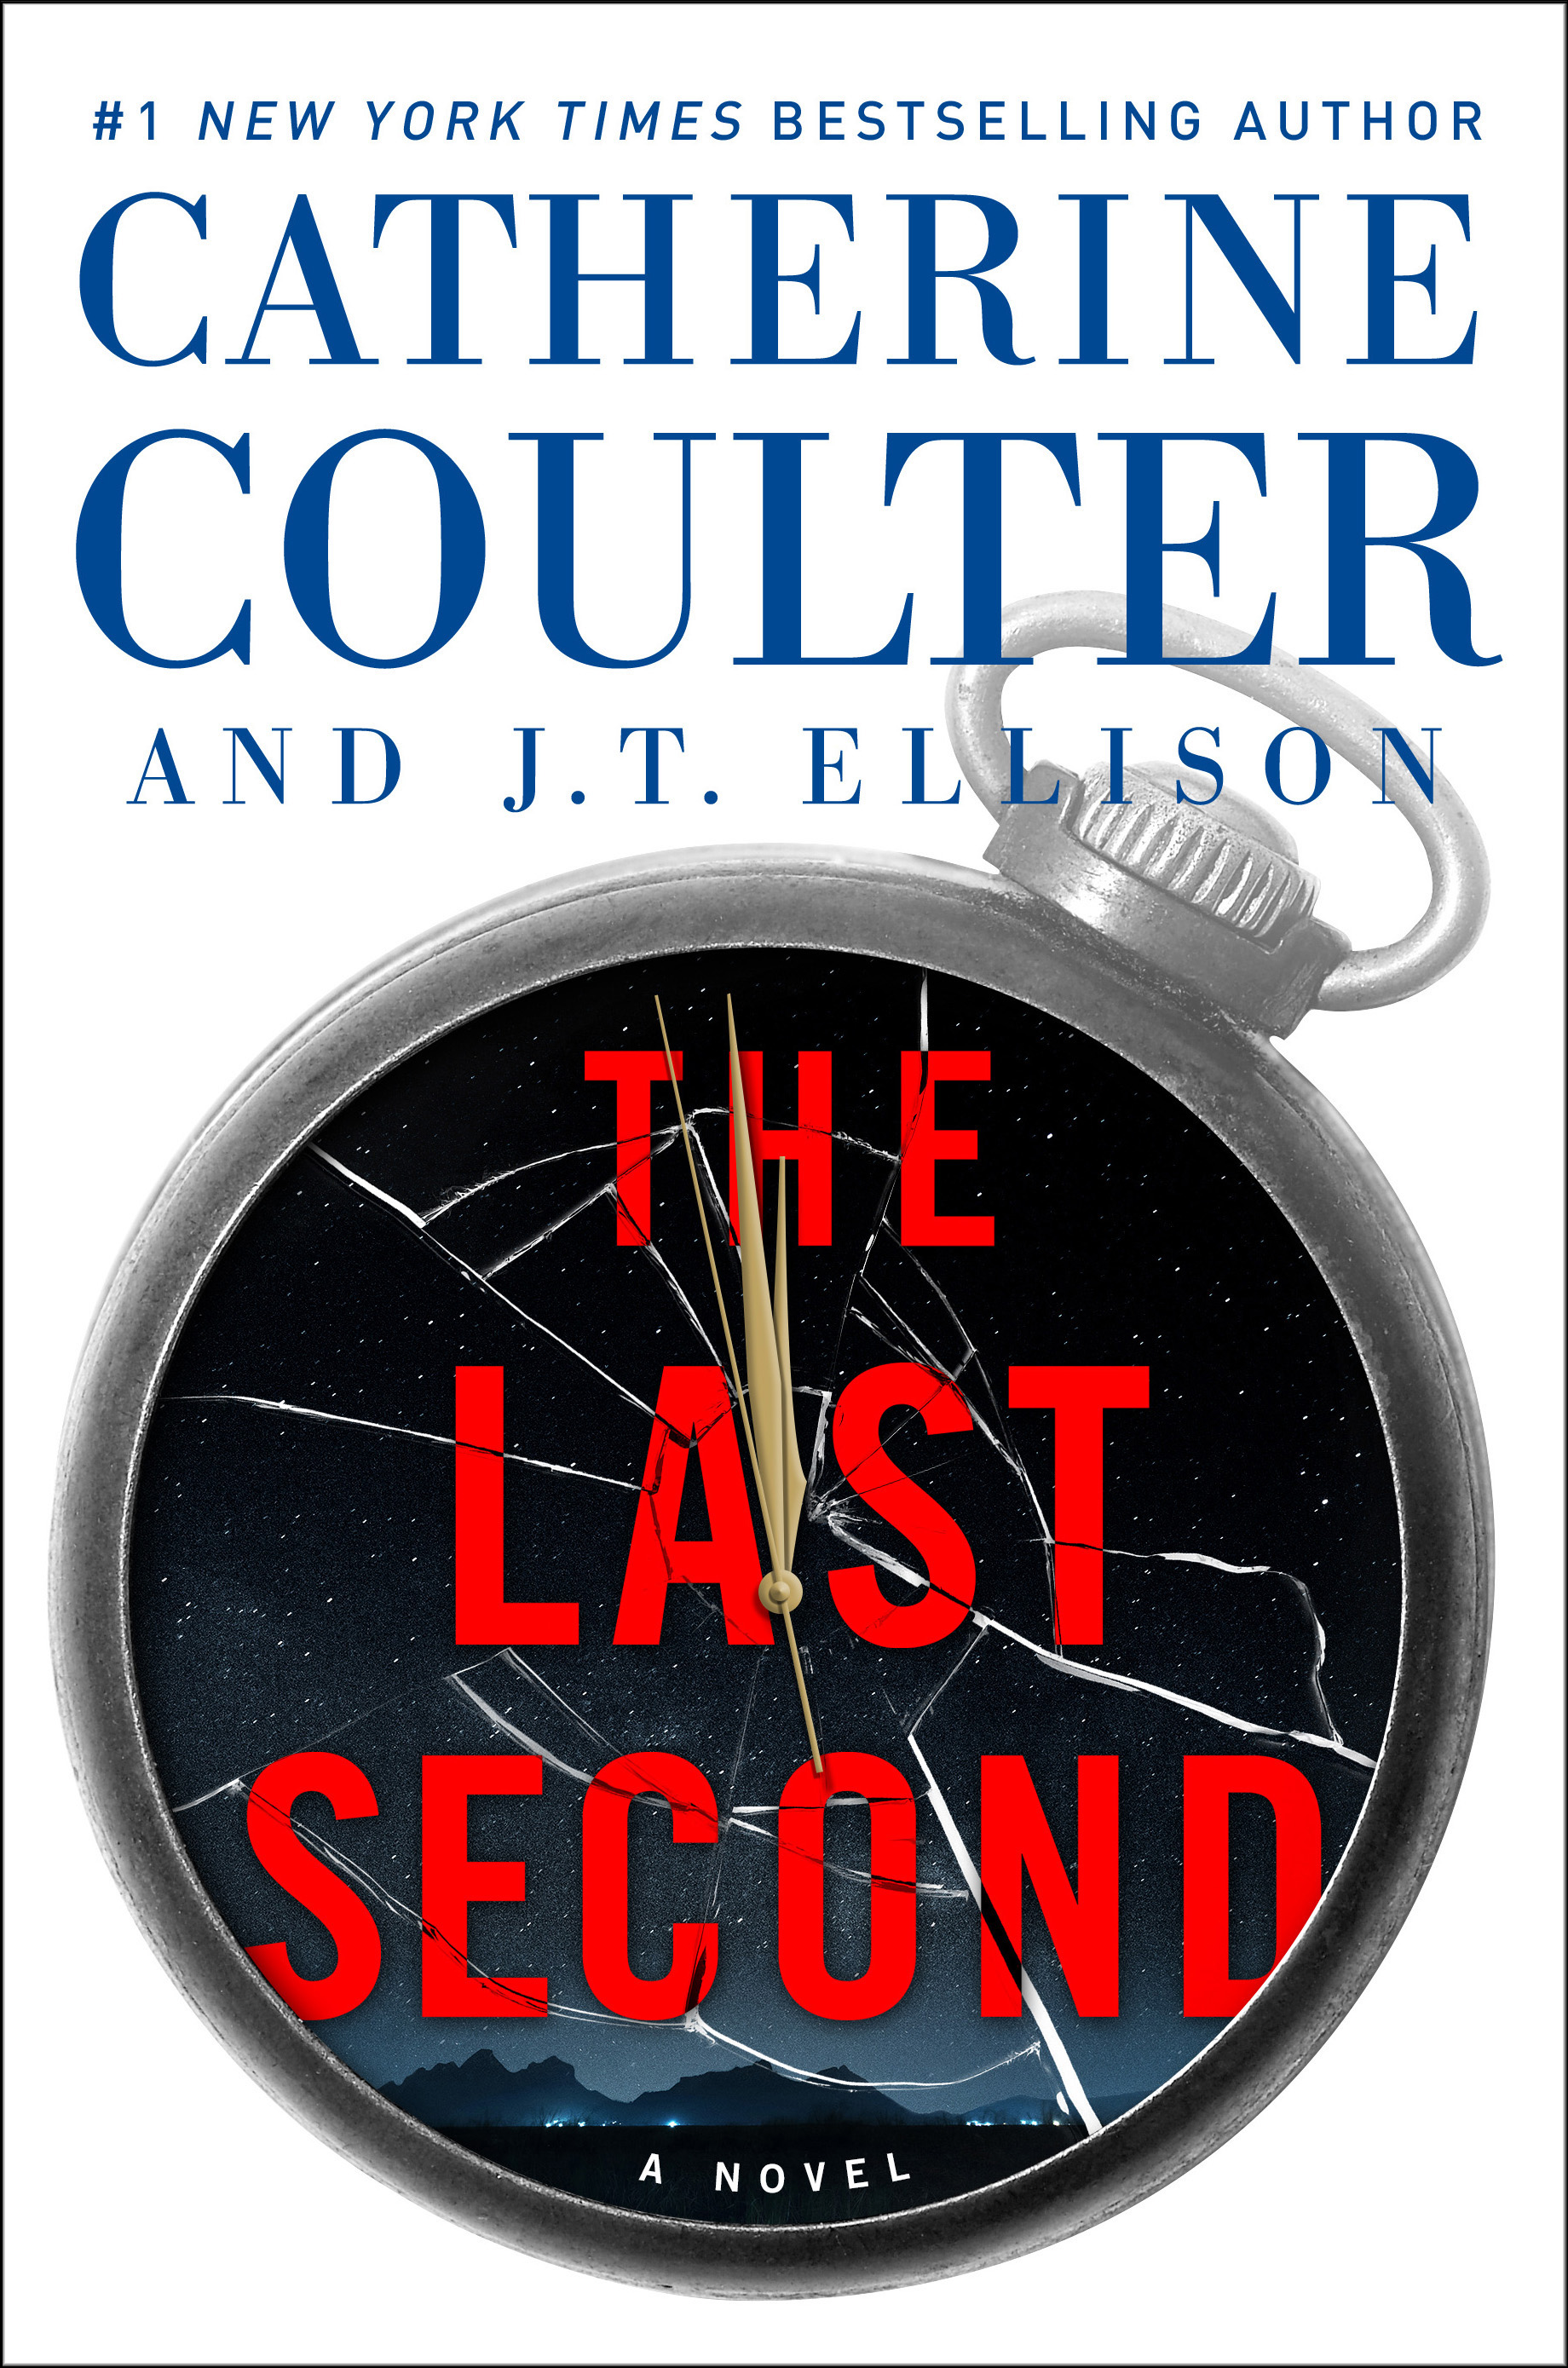 #6 - The Last Second